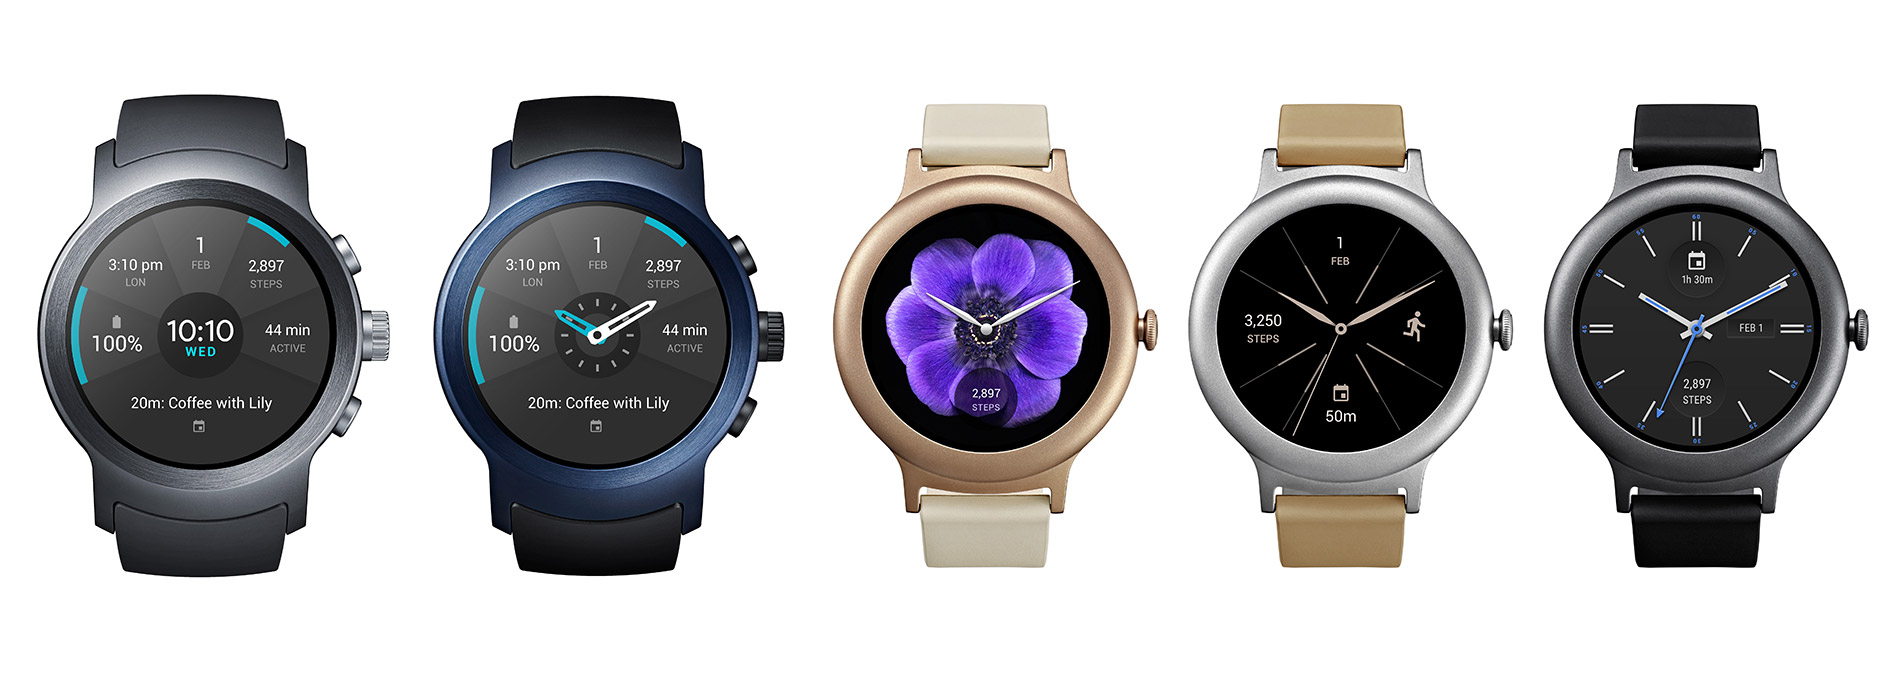 LG Watch Sport and Style